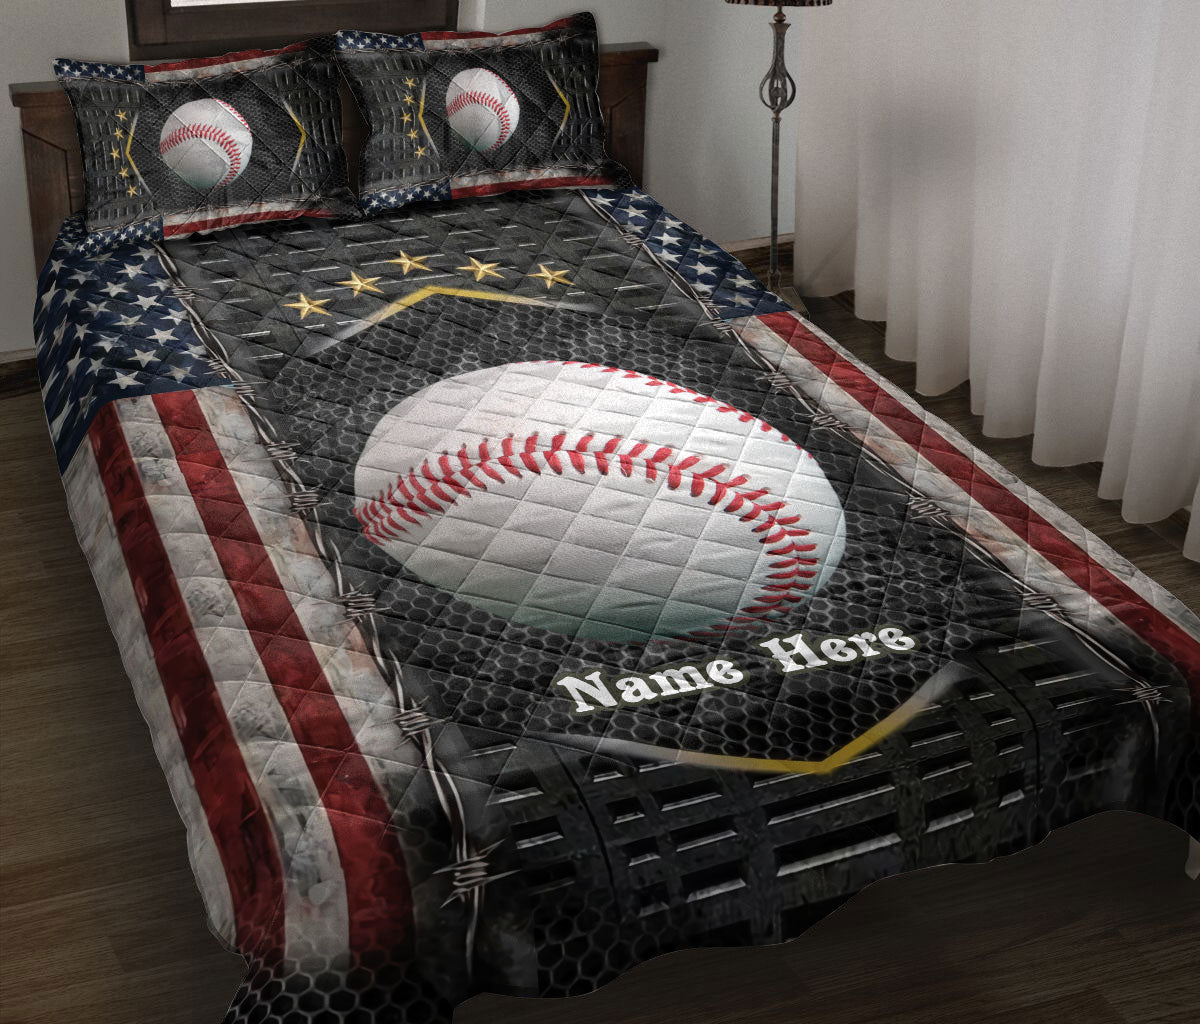 Ohaprints-Quilt-Bed-Set-Pillowcase-Baseball-American-Flag-Sports-Lover-Gift-Custom-Personalized-Name-Blanket-Bedspread-Bedding-1779-Throw (55'' x 60'')